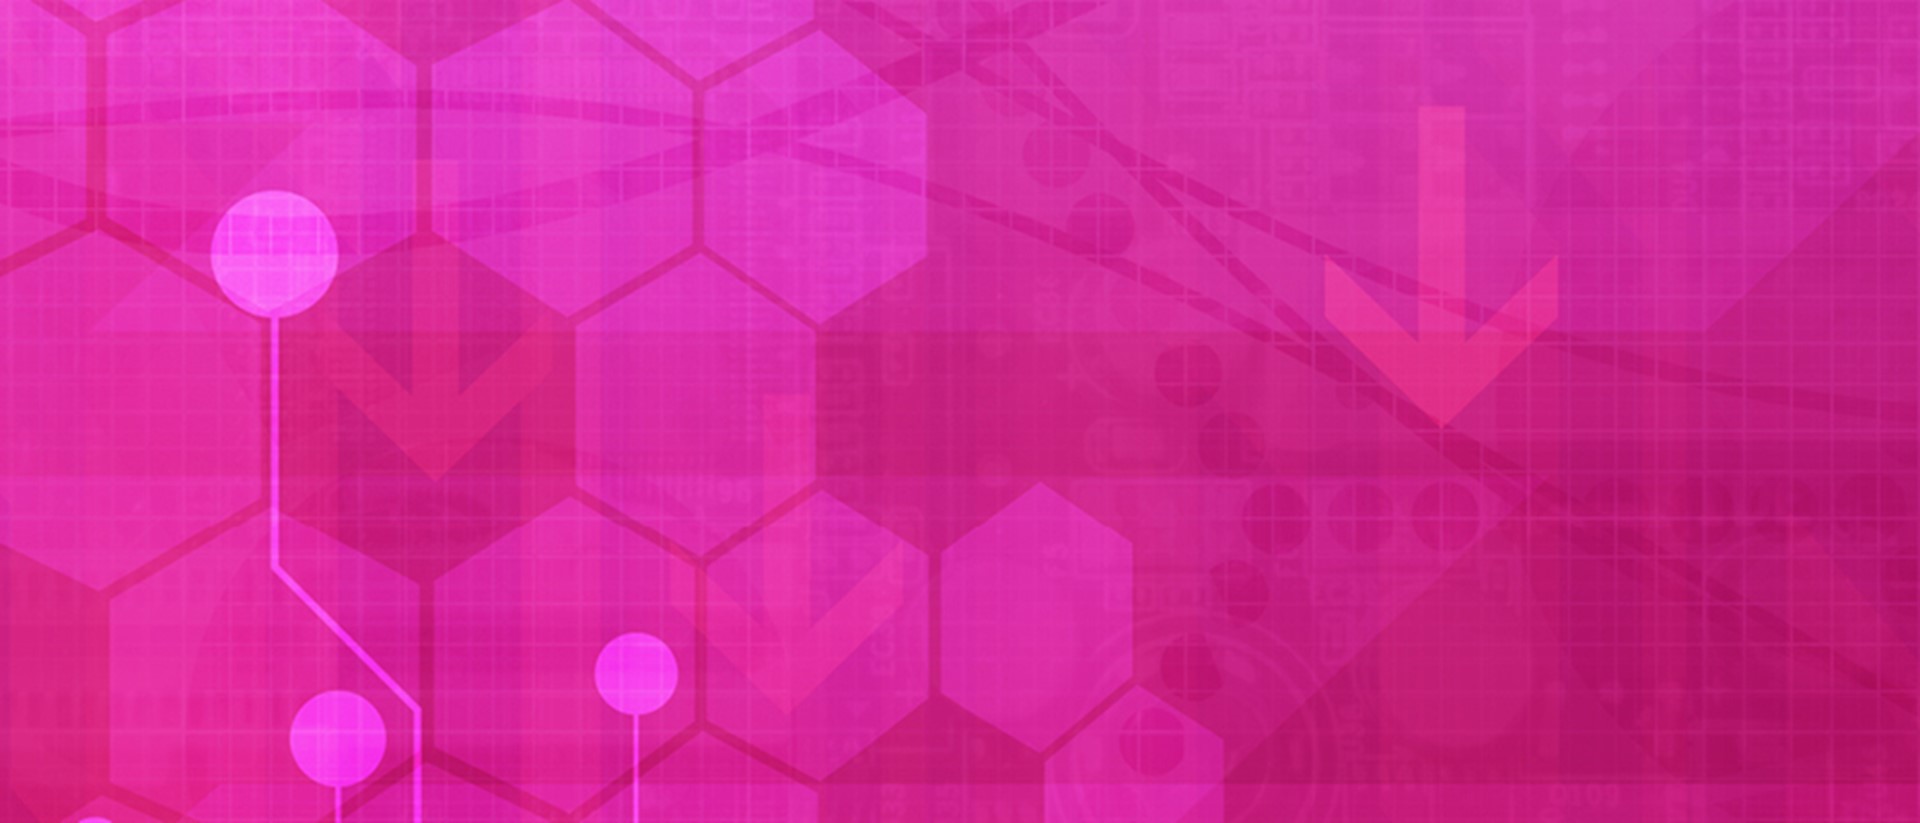 Investment image on a pink background